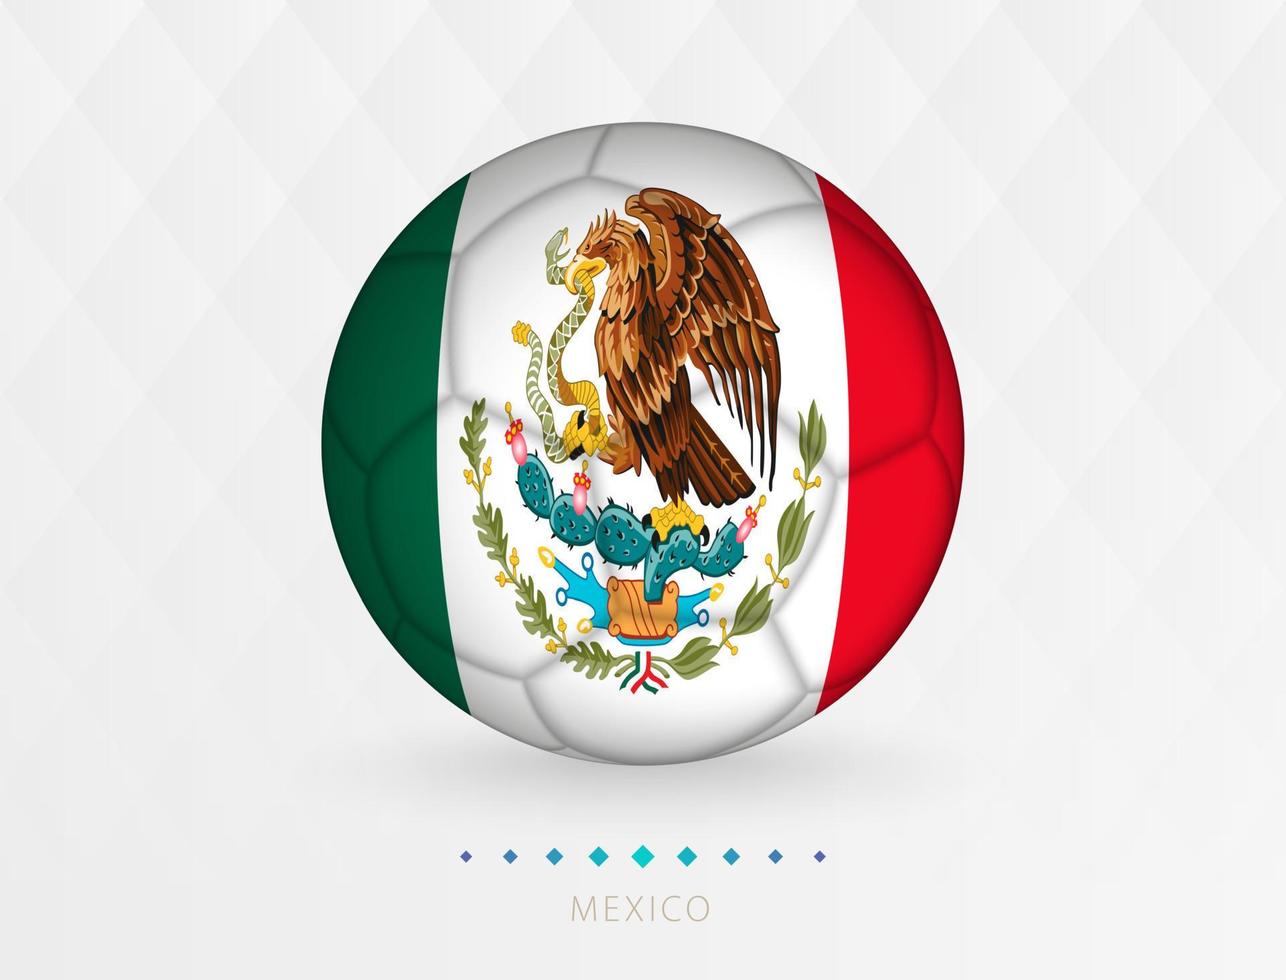 Football ball with Mexico flag pattern, soccer ball with flag of Mexico national team. vector